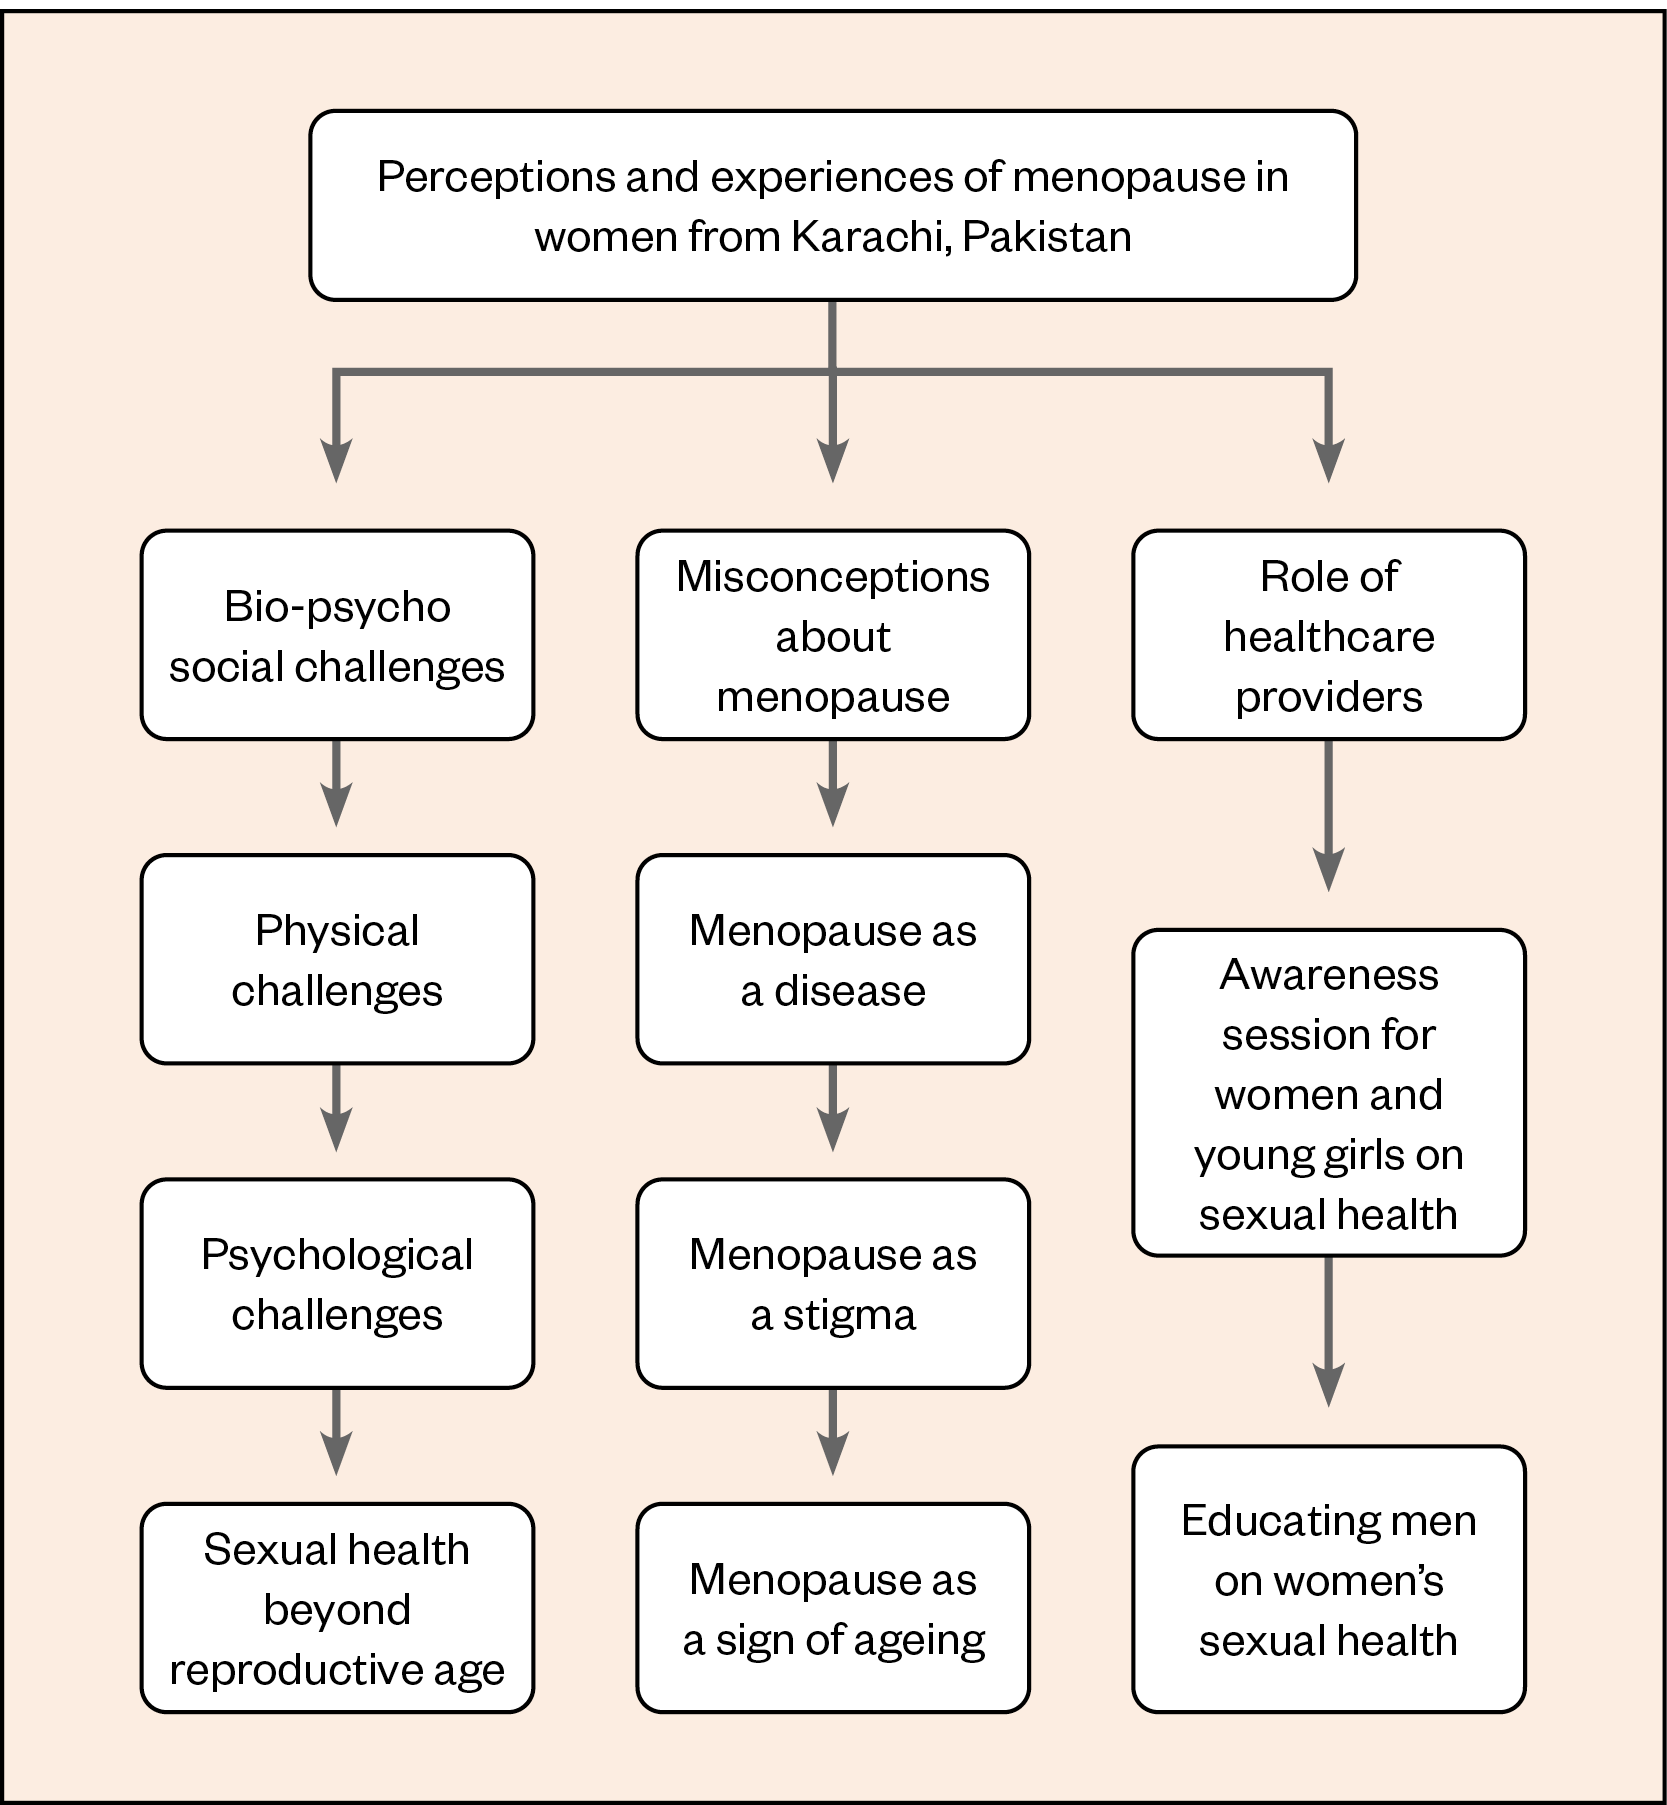 Figure 2: Perceptions and experiences of menopause in women from Karachi, Pakistan